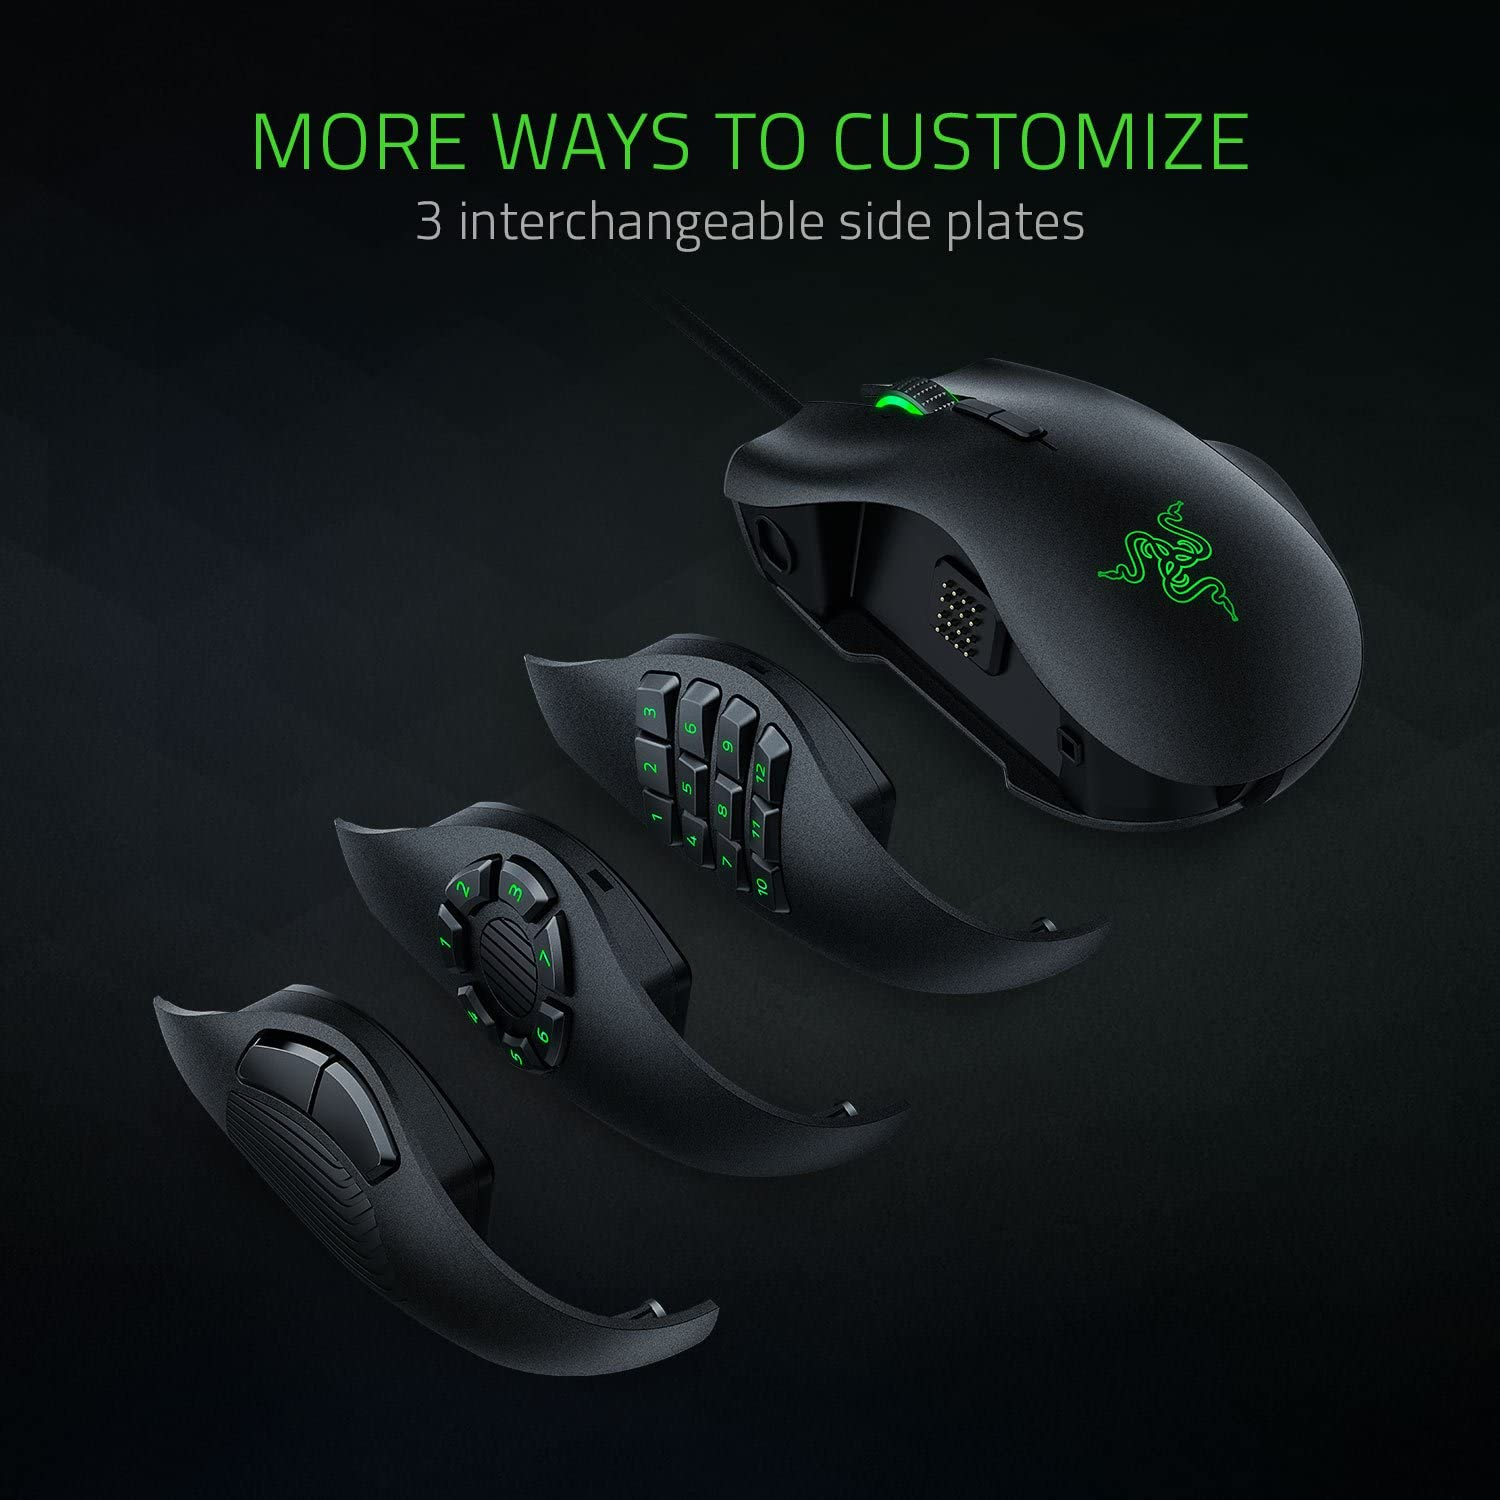 It may be best to buy a gaming mouse that doesn’t have lots of buttons as the extra buttons may not be needed and will just make the mouse more expensive.